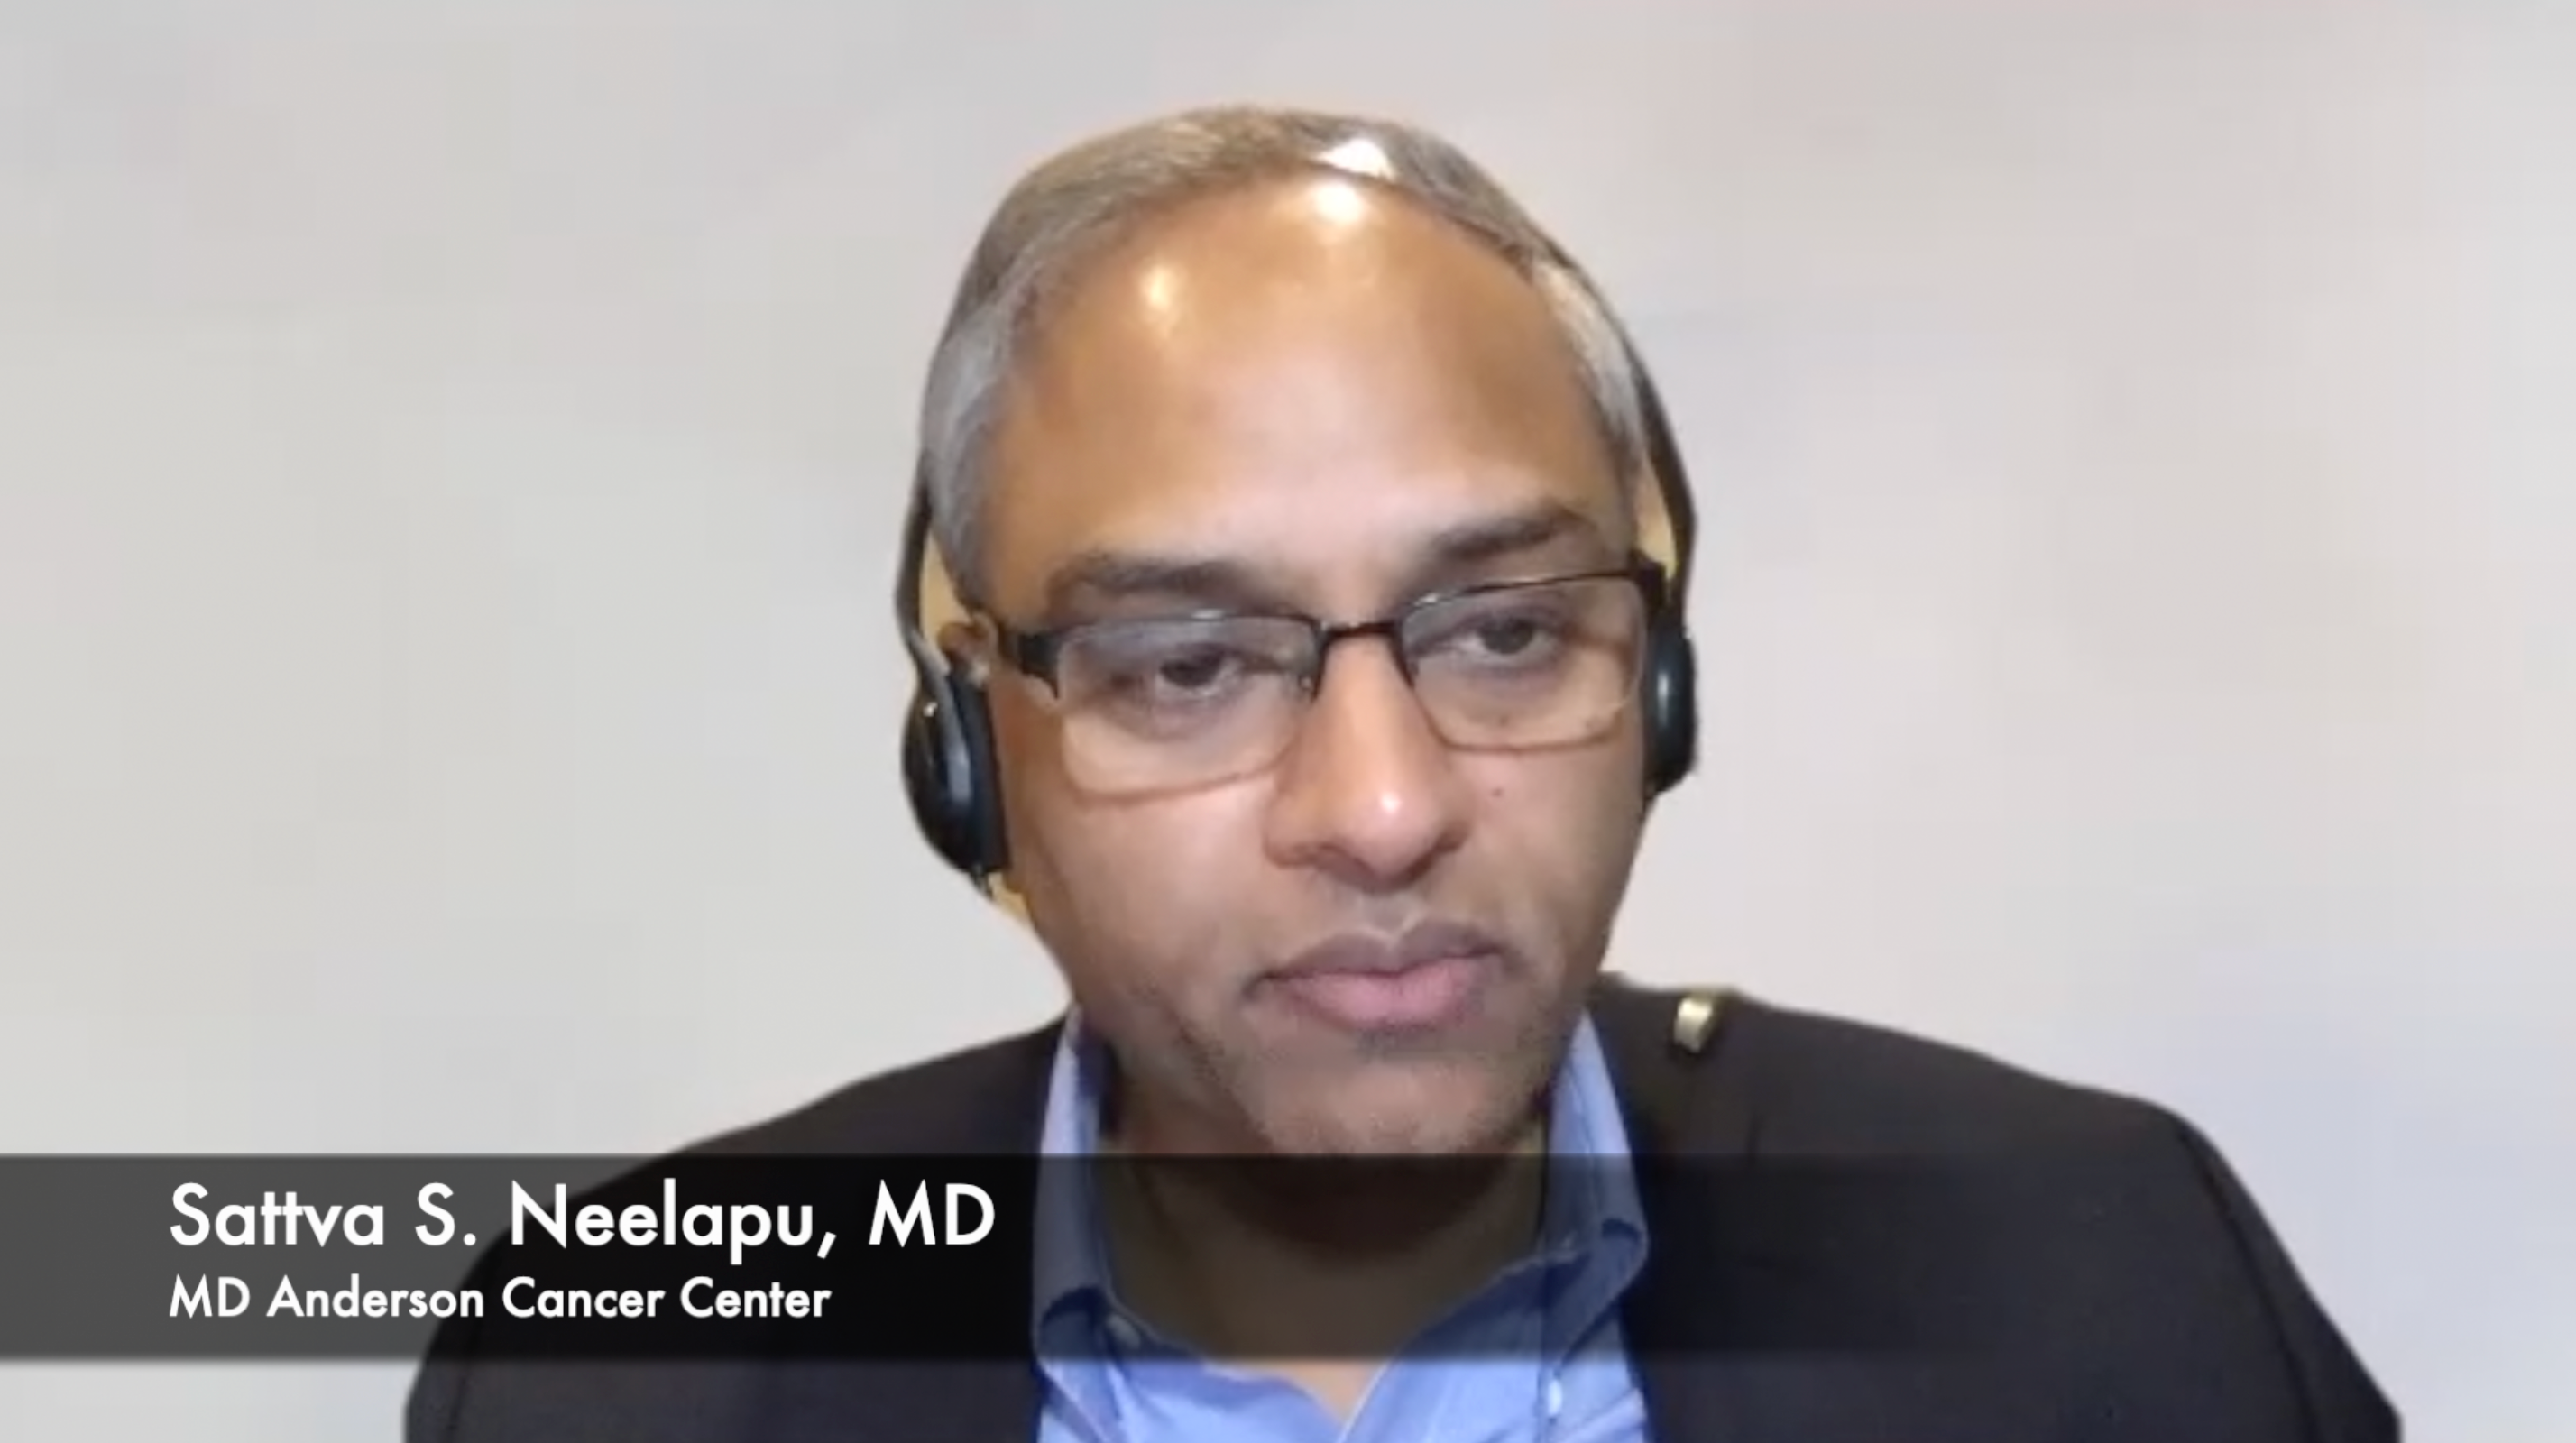 Sattva S. Neelapu, MD, Discusses the Results of the ZUMA-5 Trial With Axi-Cel in R/R iNHL